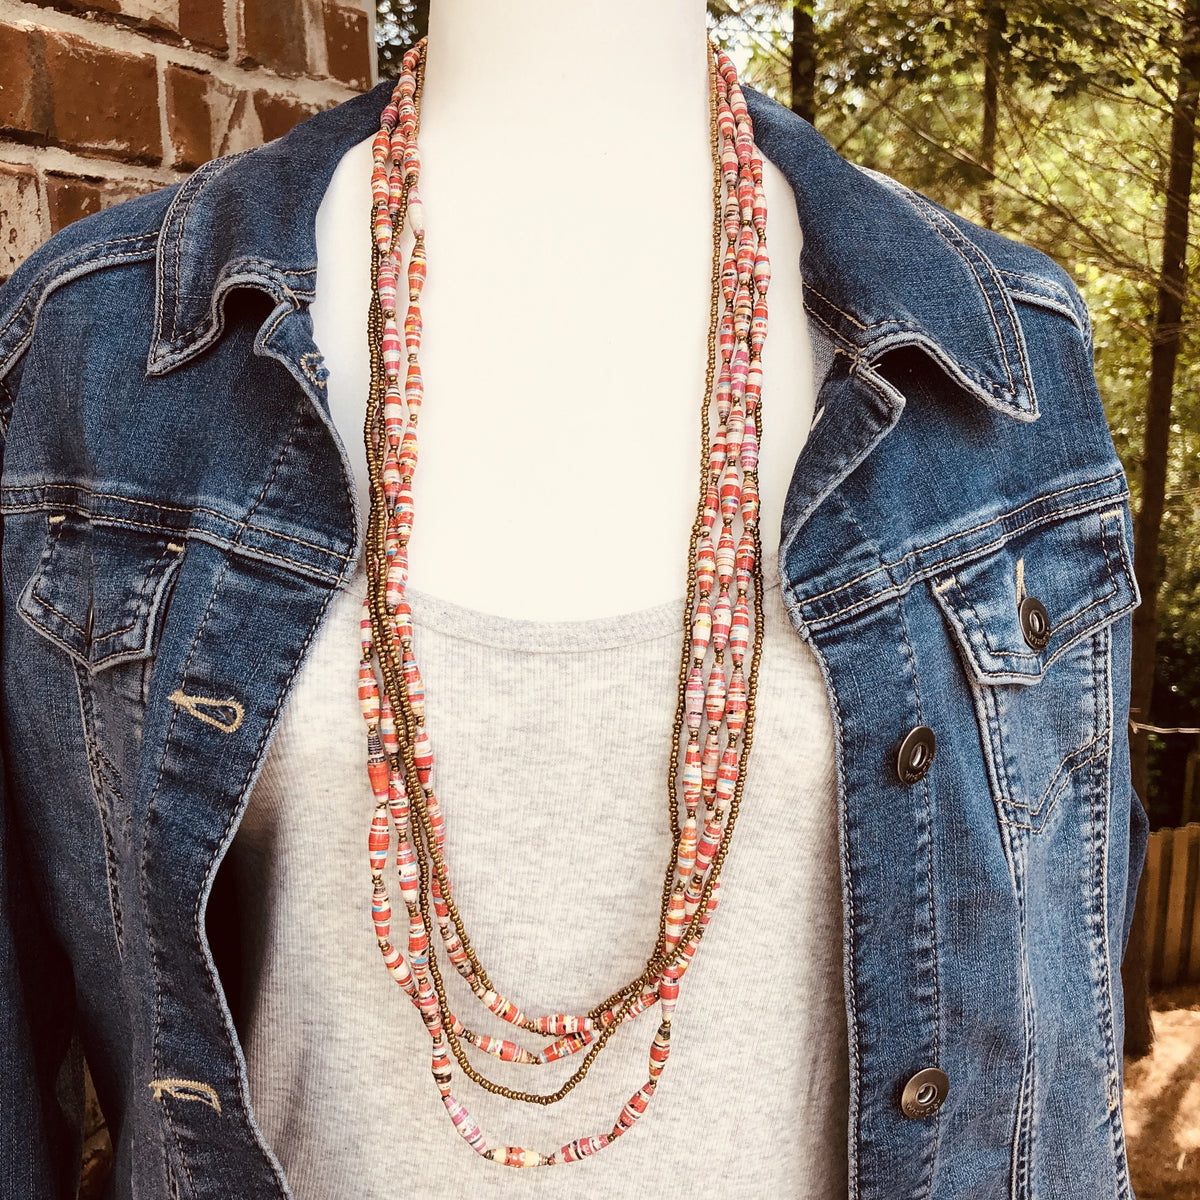 Nnyabo Boho Chic Handmade Beaded Multi Strand Long Necklace (Available in 3 Color Combinations)